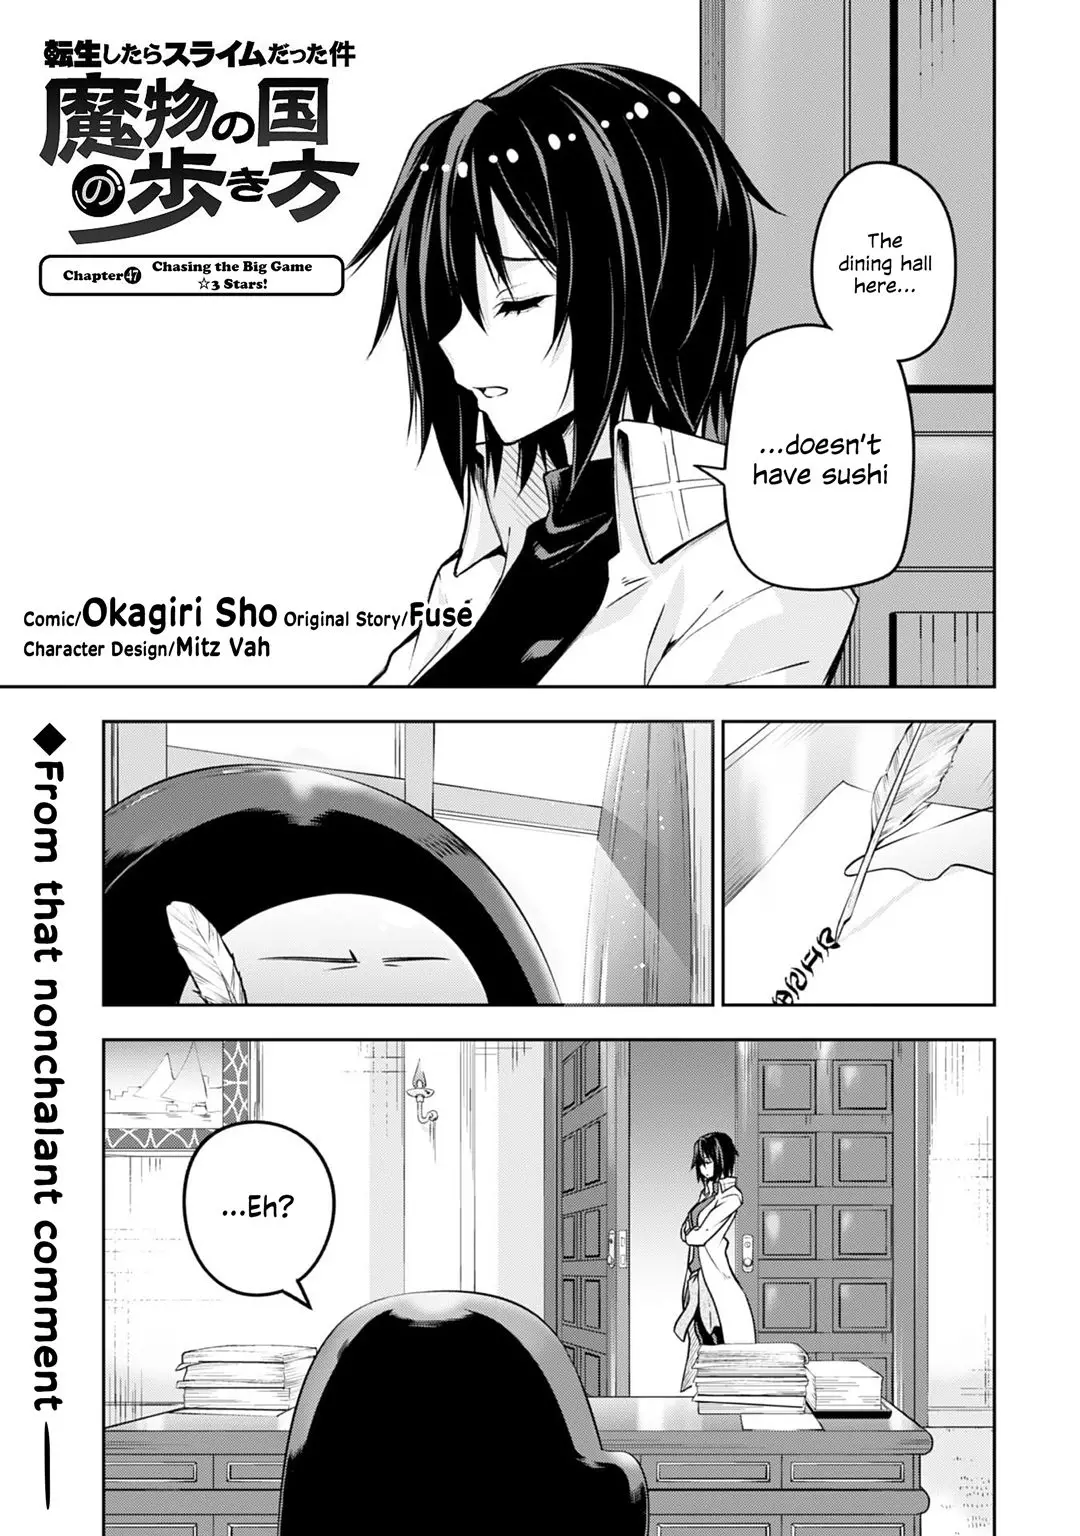 Tensei Shitara Slime Datta Ken: The Ways of Strolling in the Demon Country - 47 page 1